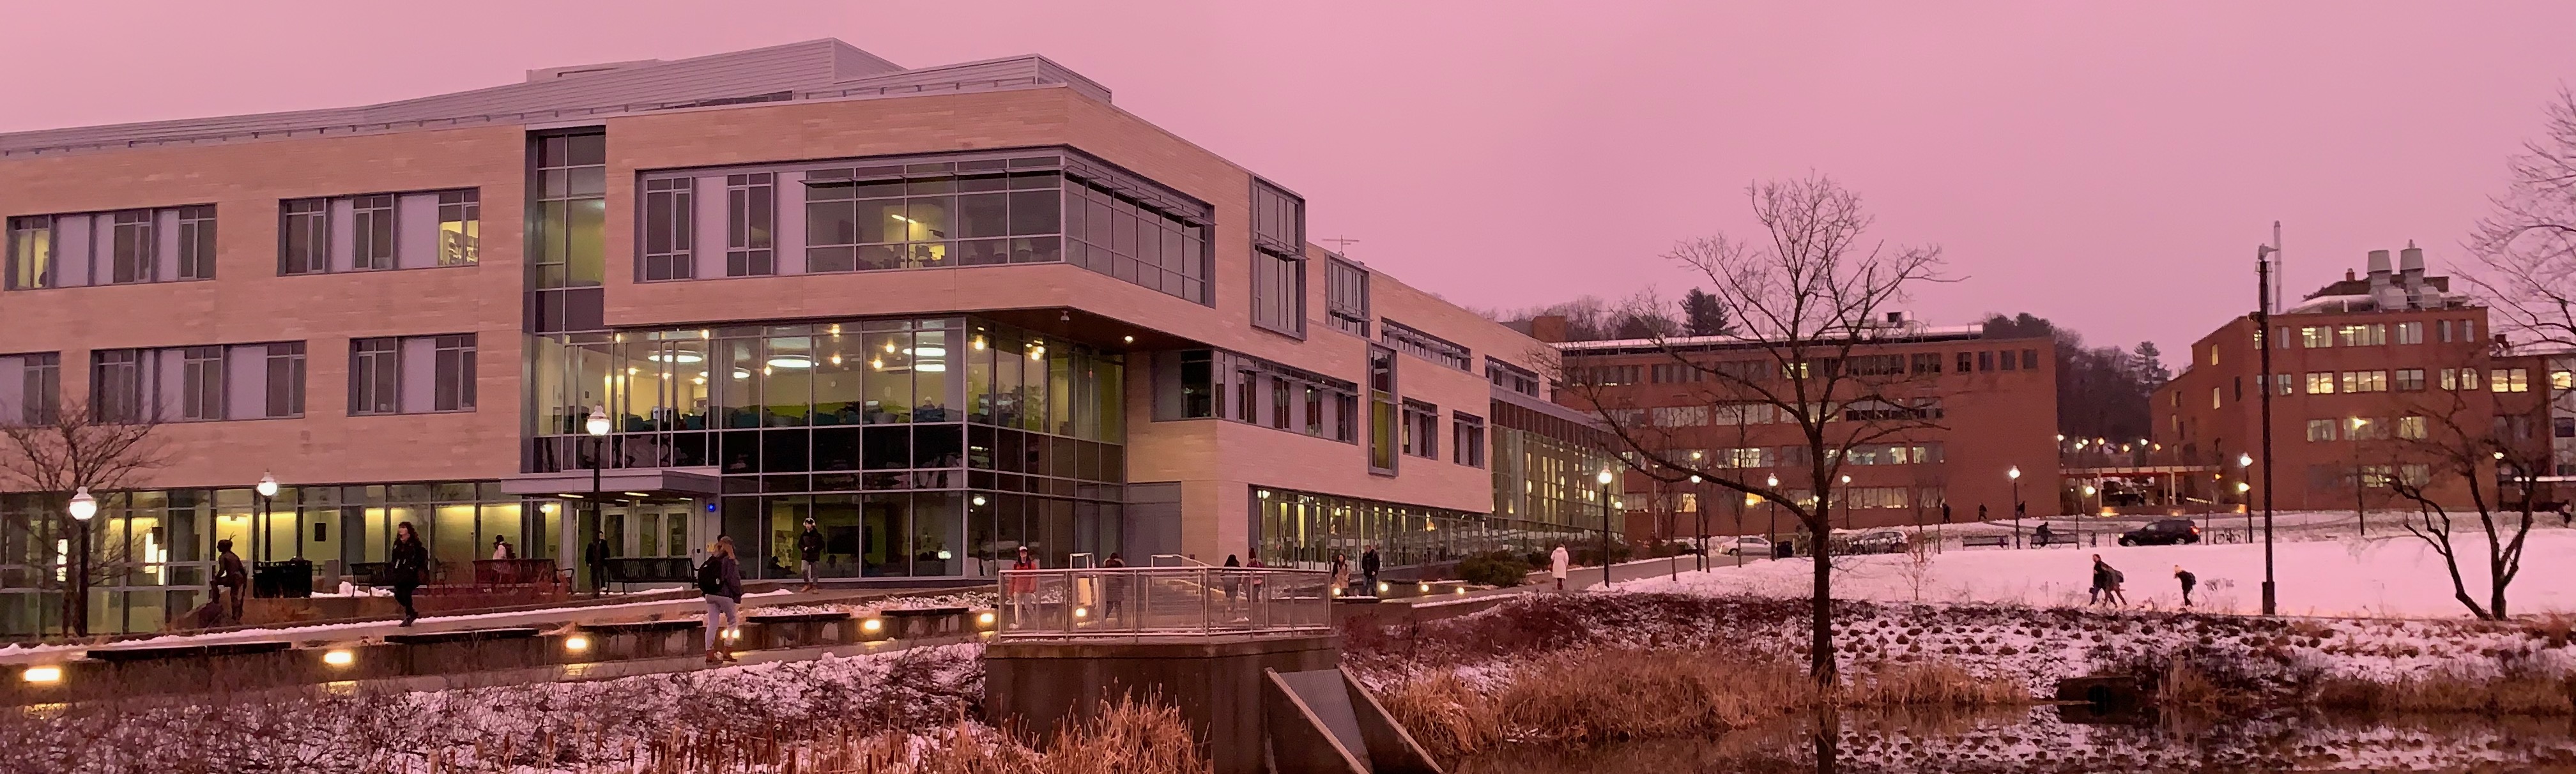 A picture of the Integrated Learning Center at UMass Amherst during a particularly pink dusk